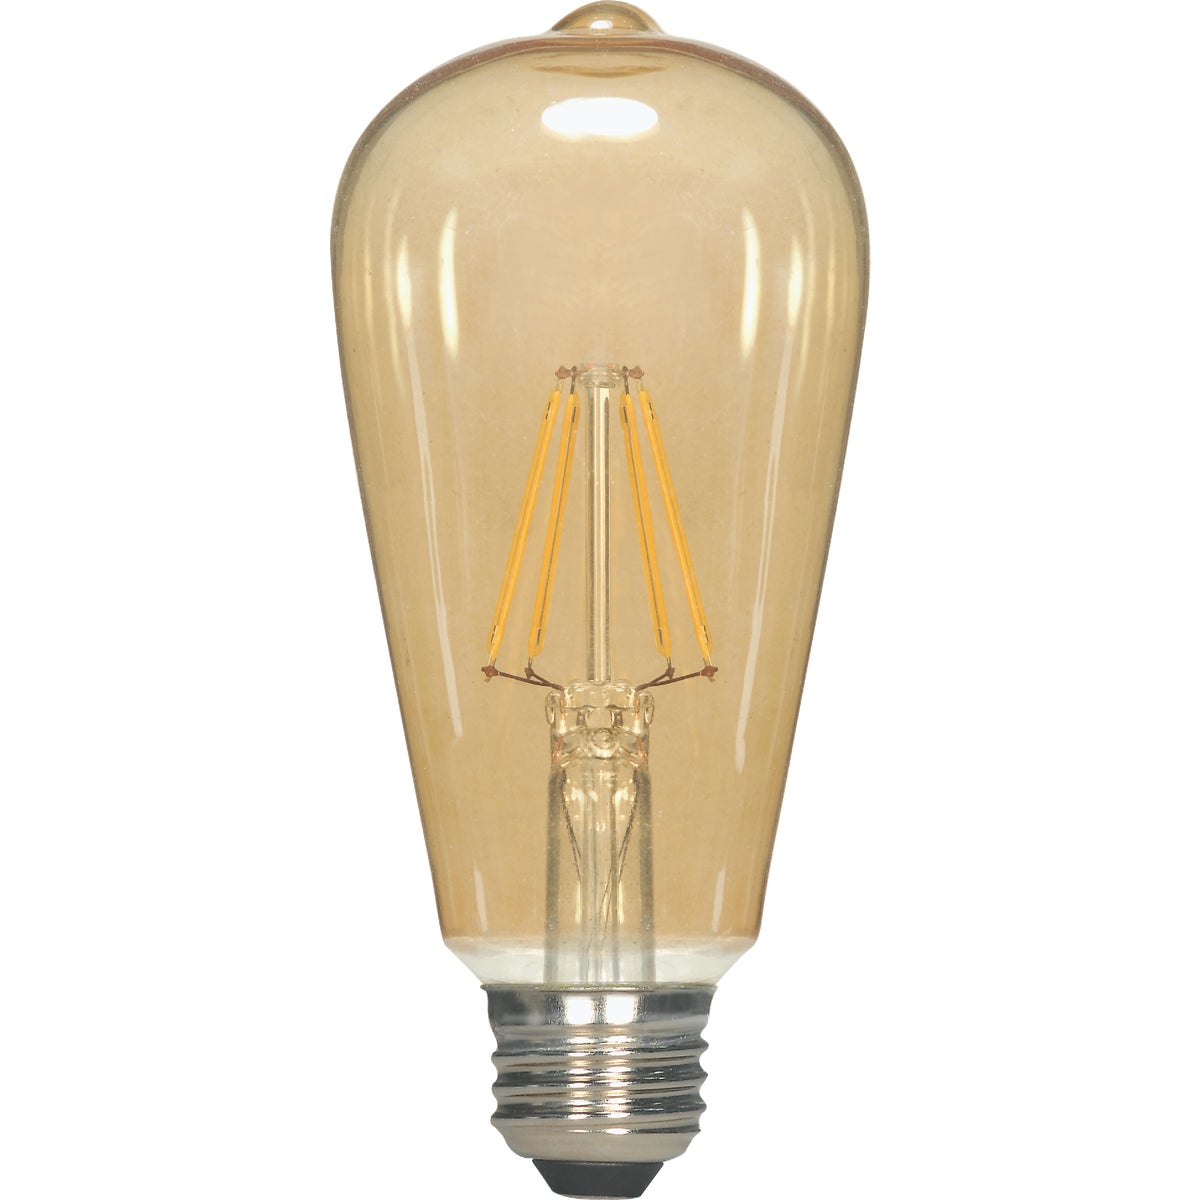 Item 564406, ST19 LED (light emitting diode) featuring a traditional incandescent look 